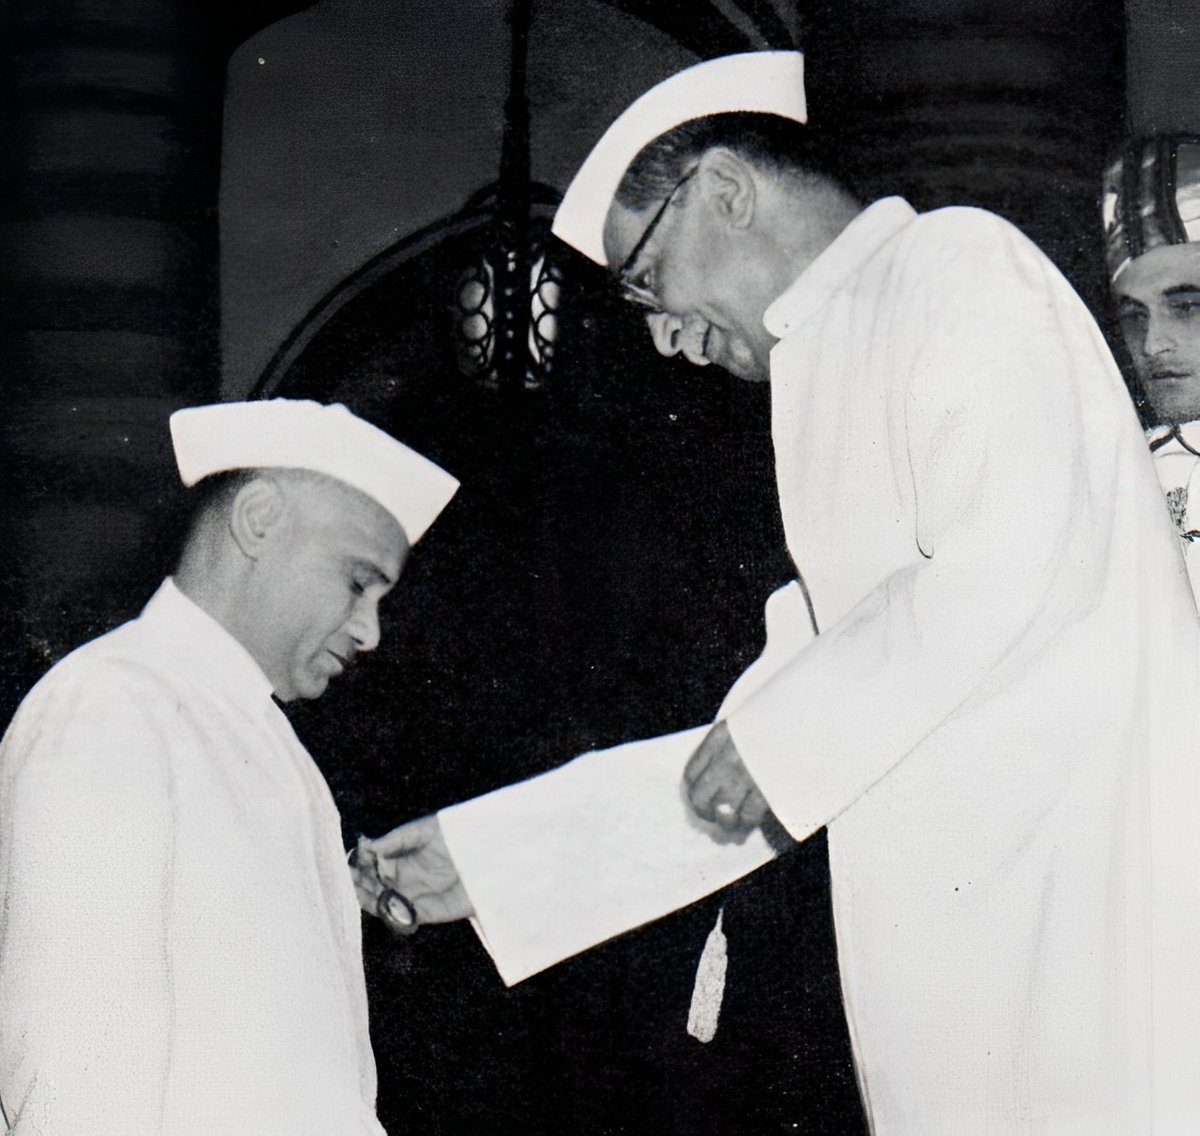 Dr Rajendra Prasad, President of India, conferring Padma Shri on Dr Atma Ram, Director @official_cgcri at an investiture ceremony held at Rashtrapathi Bhavan on April 8, 1959 for his outstanding contributions in ceramics & glass technology. @CSIR_IND #Archive